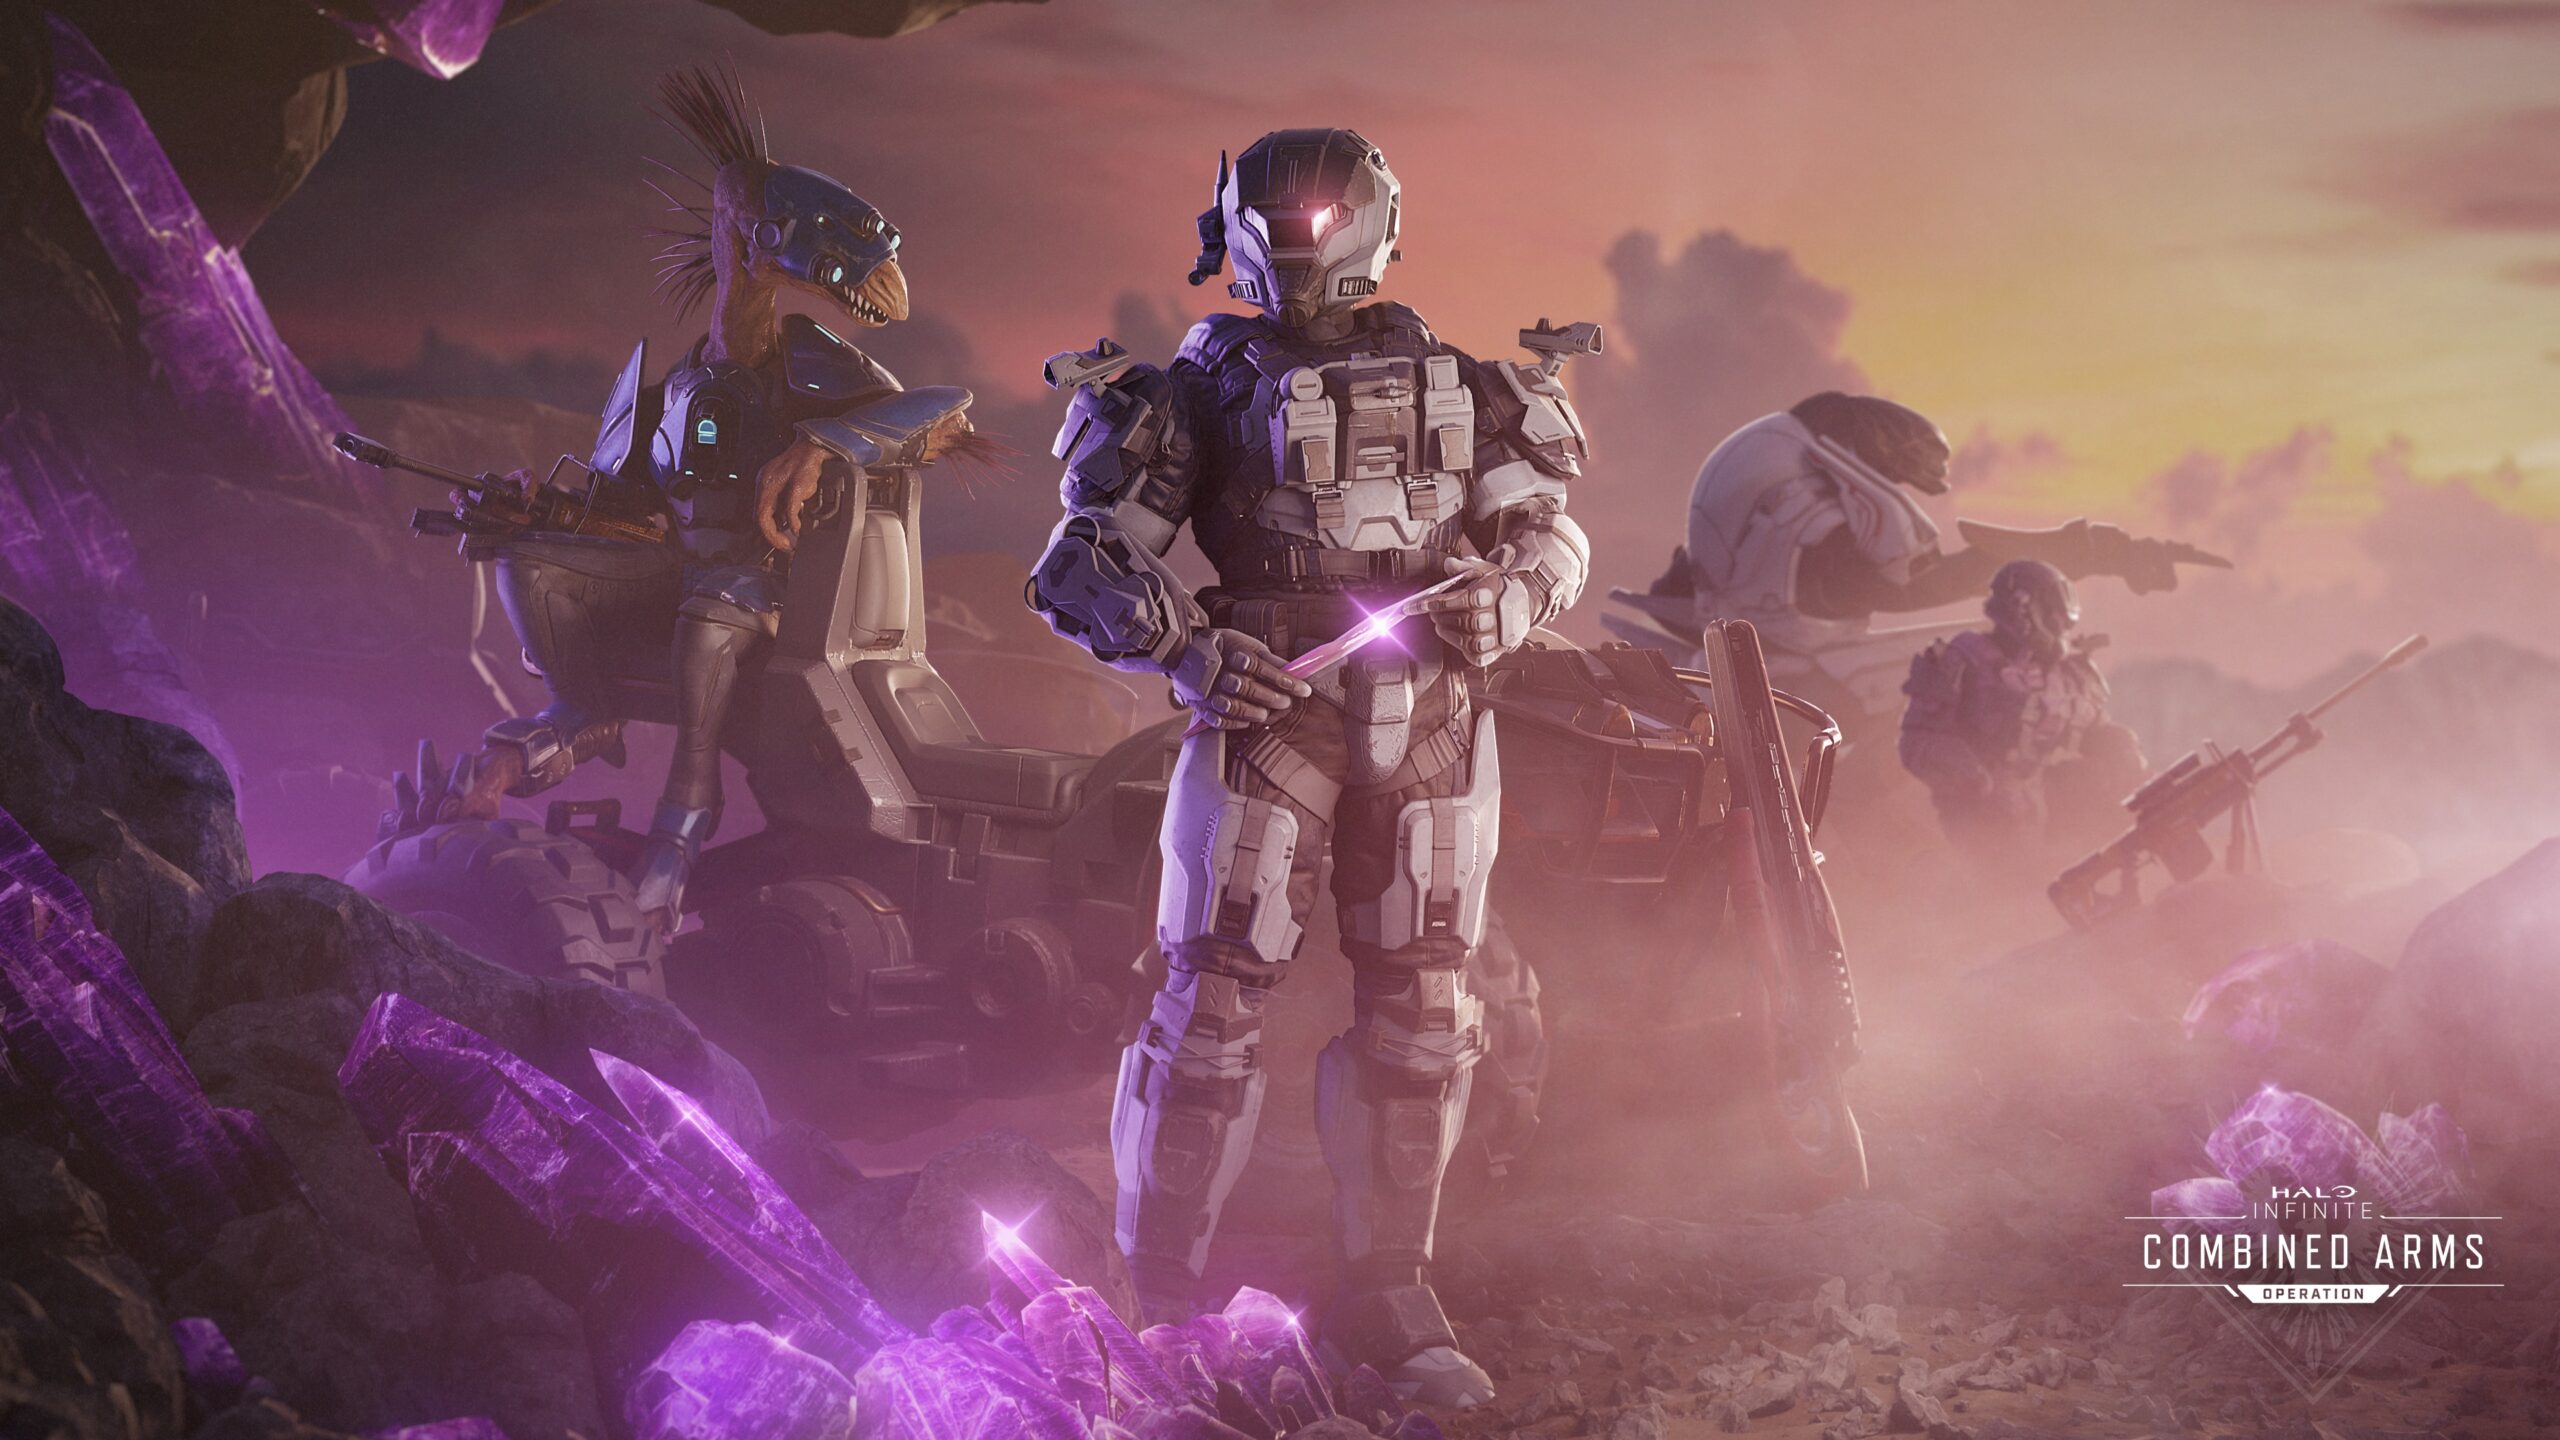 Halo Infinite key art for the Combined Arms Operation showing (from left-to-right) a Kig-Yar sat on the back of a Mongoose, a Spartan holding a shard of blamite, a Sangheili Ultra without a helmet, and another Spartan kneeling